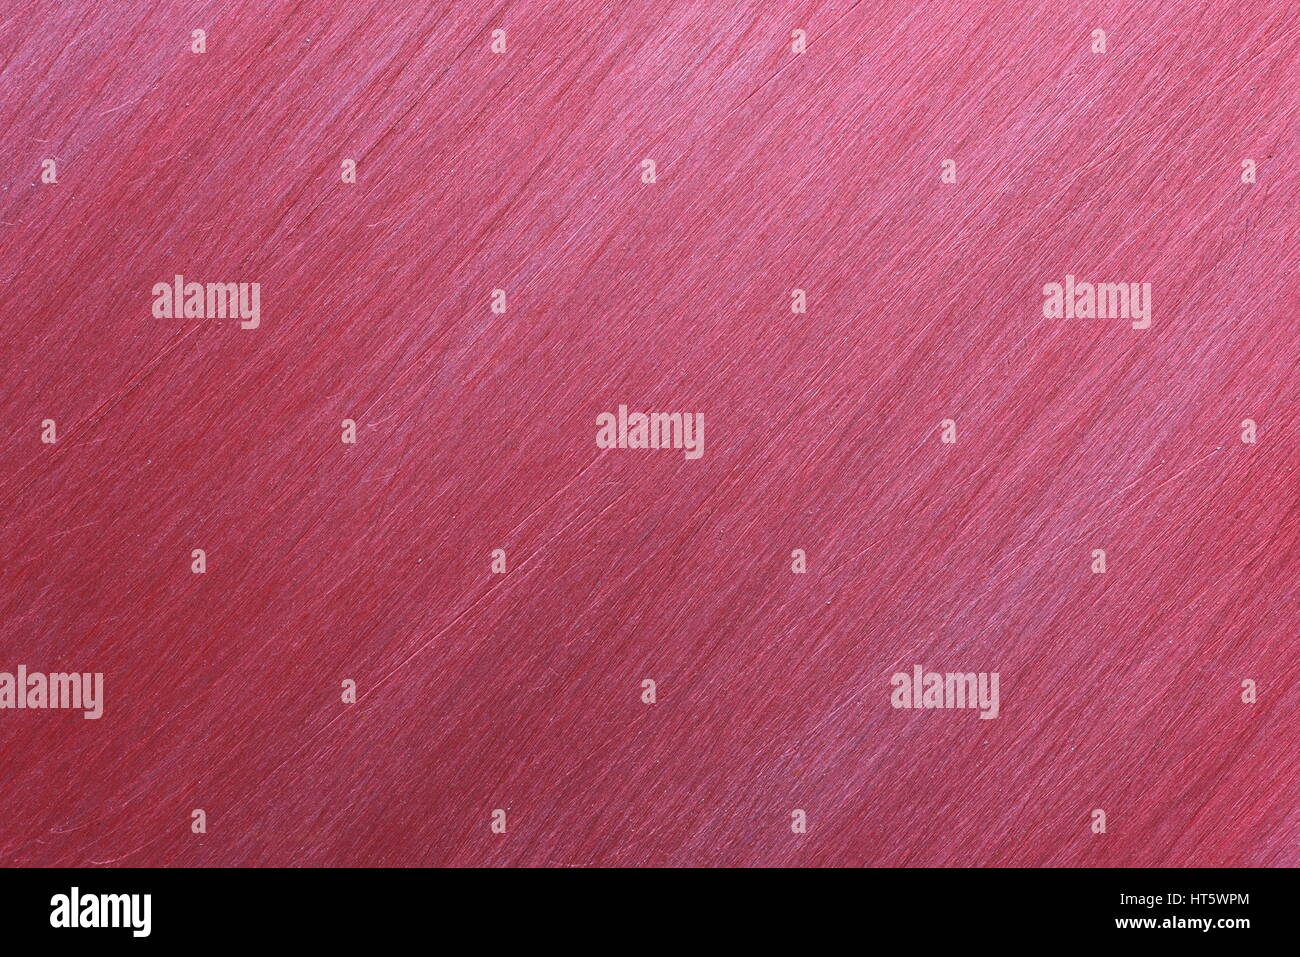 Scratched Aluminum Plate Texture or Background Stock Photo